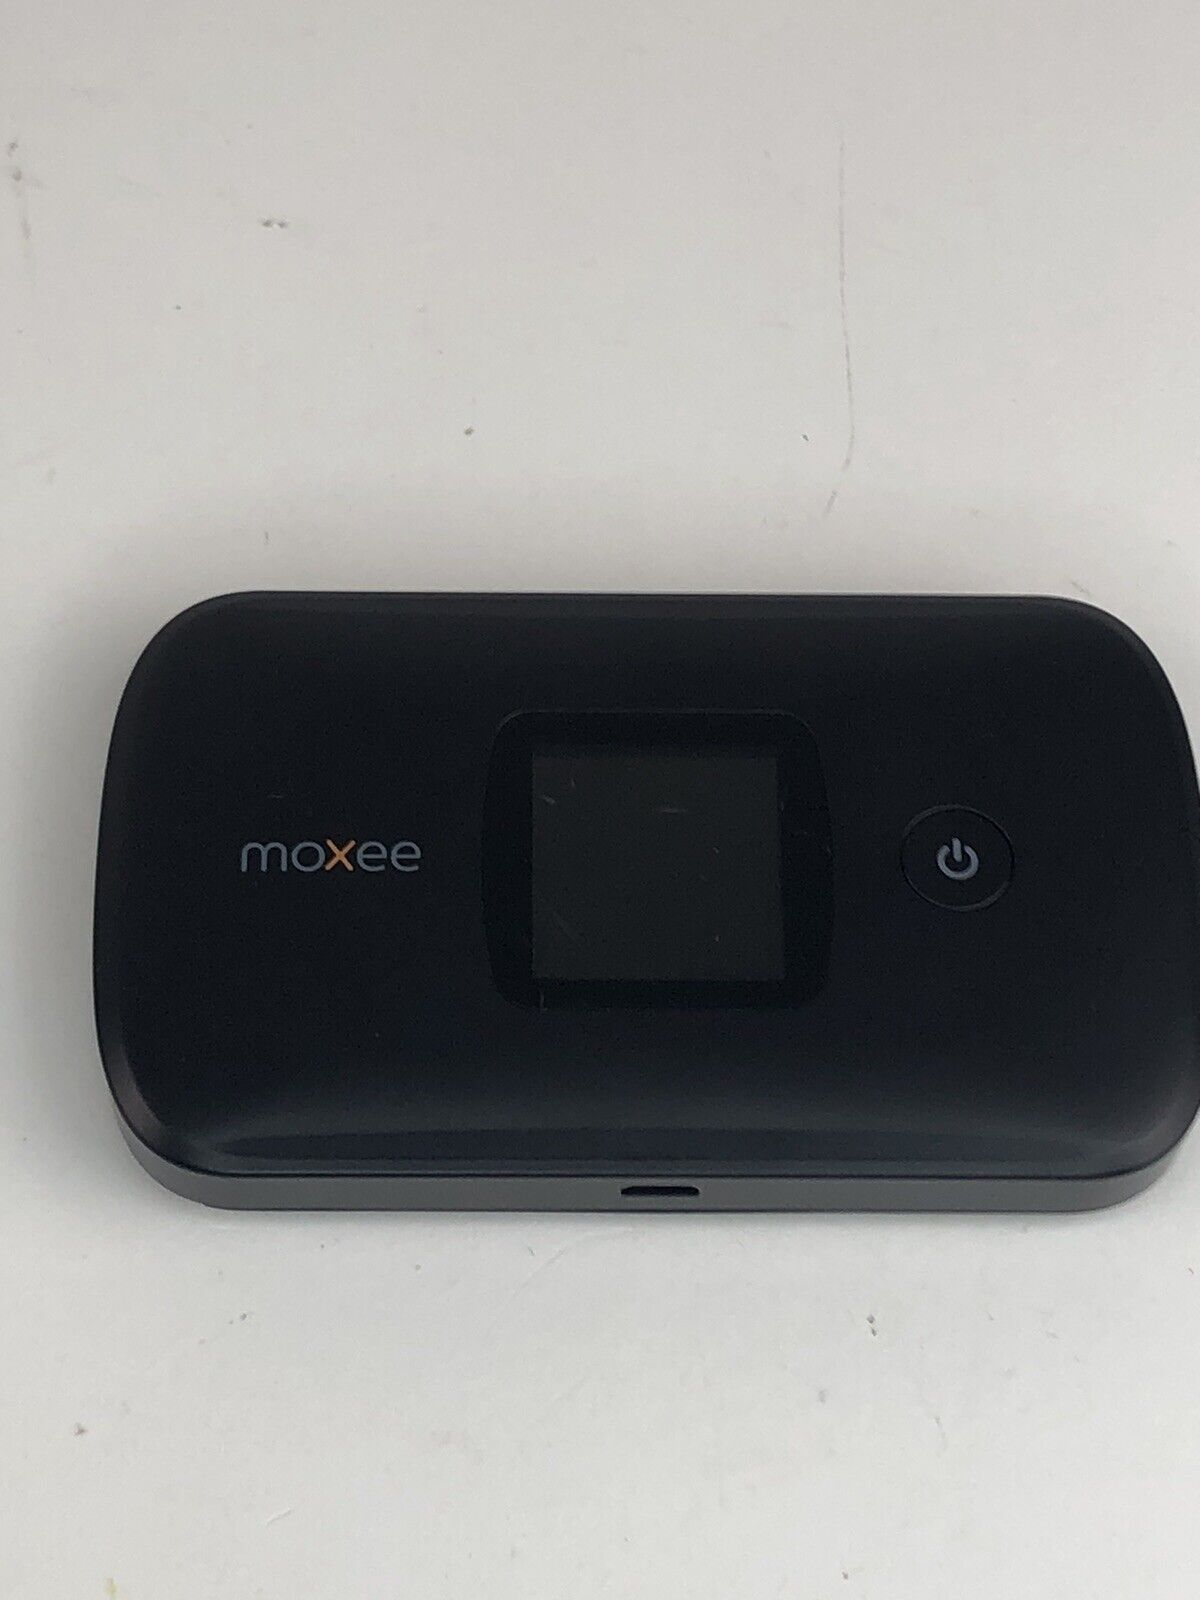 AT&T Prepaid MOXEE K779 4G LTE Mobile Hotspot - Black - 256MB(No Battery)